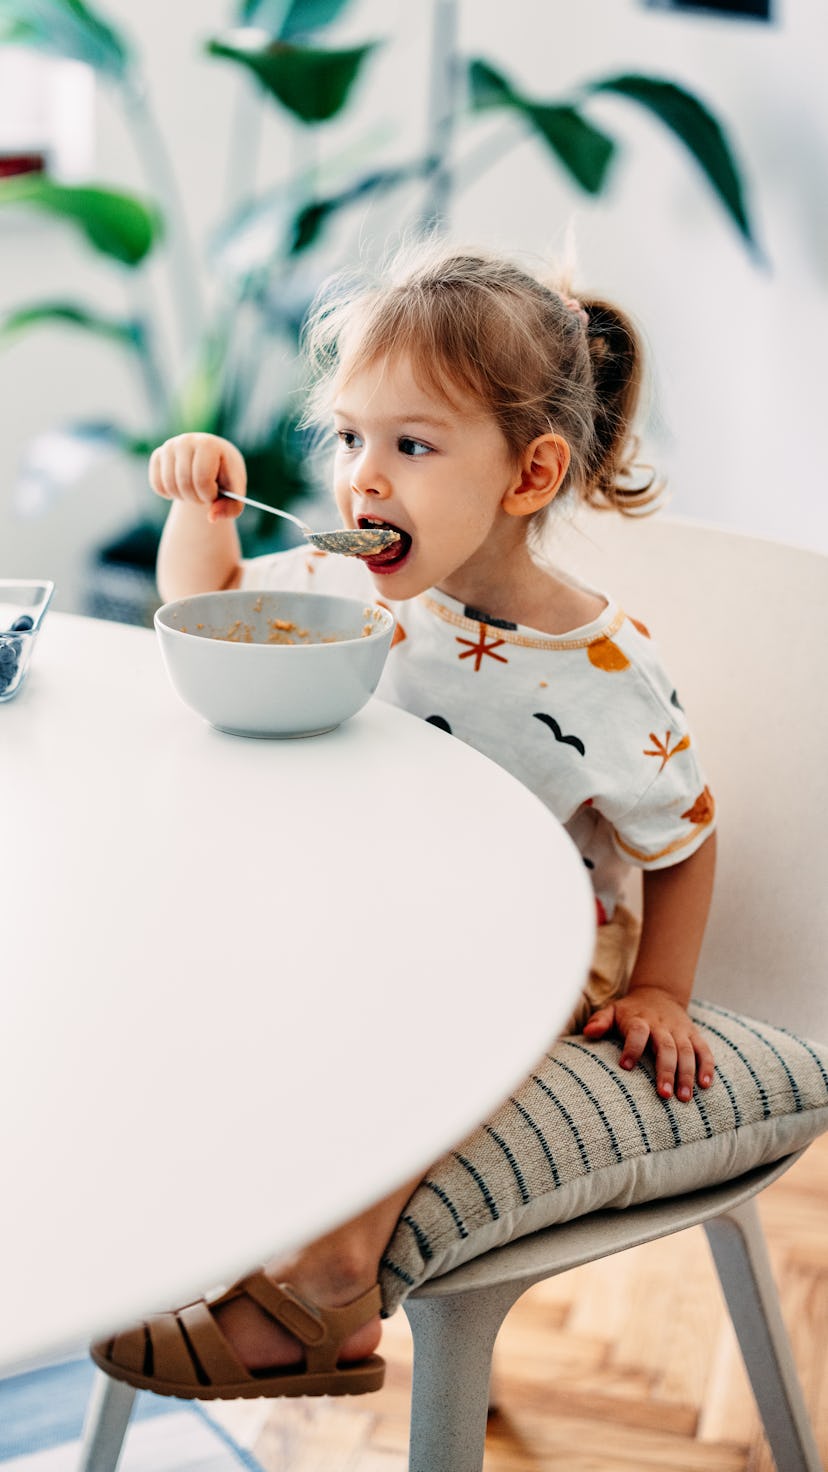 Cute girl having fun while eating cereals with fruit for breakfast in the kitchen.